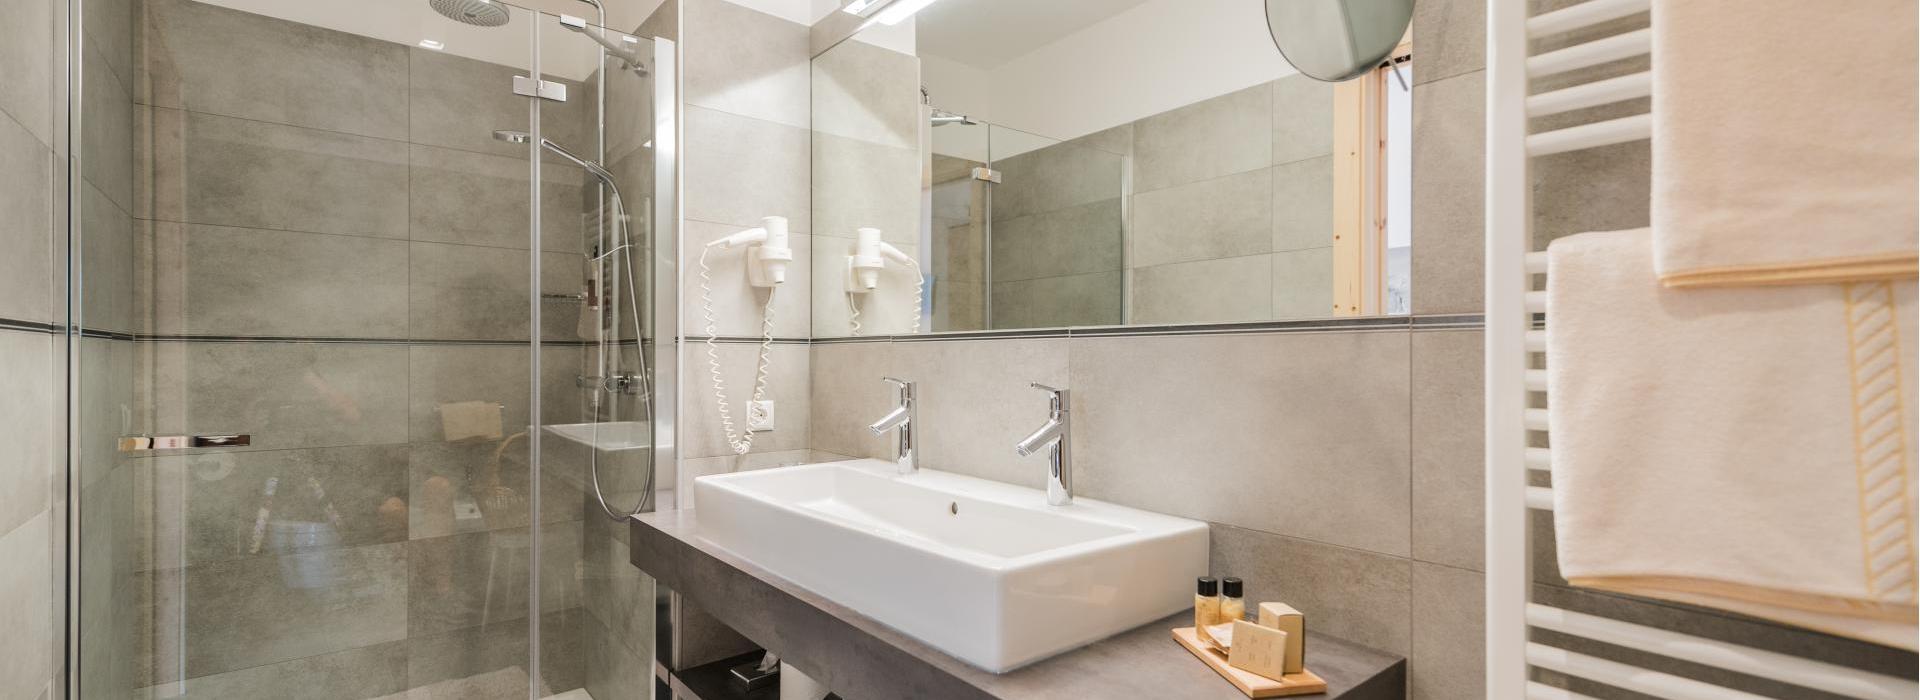 Bathroom of the Junior Suite South with shower and double washbasin